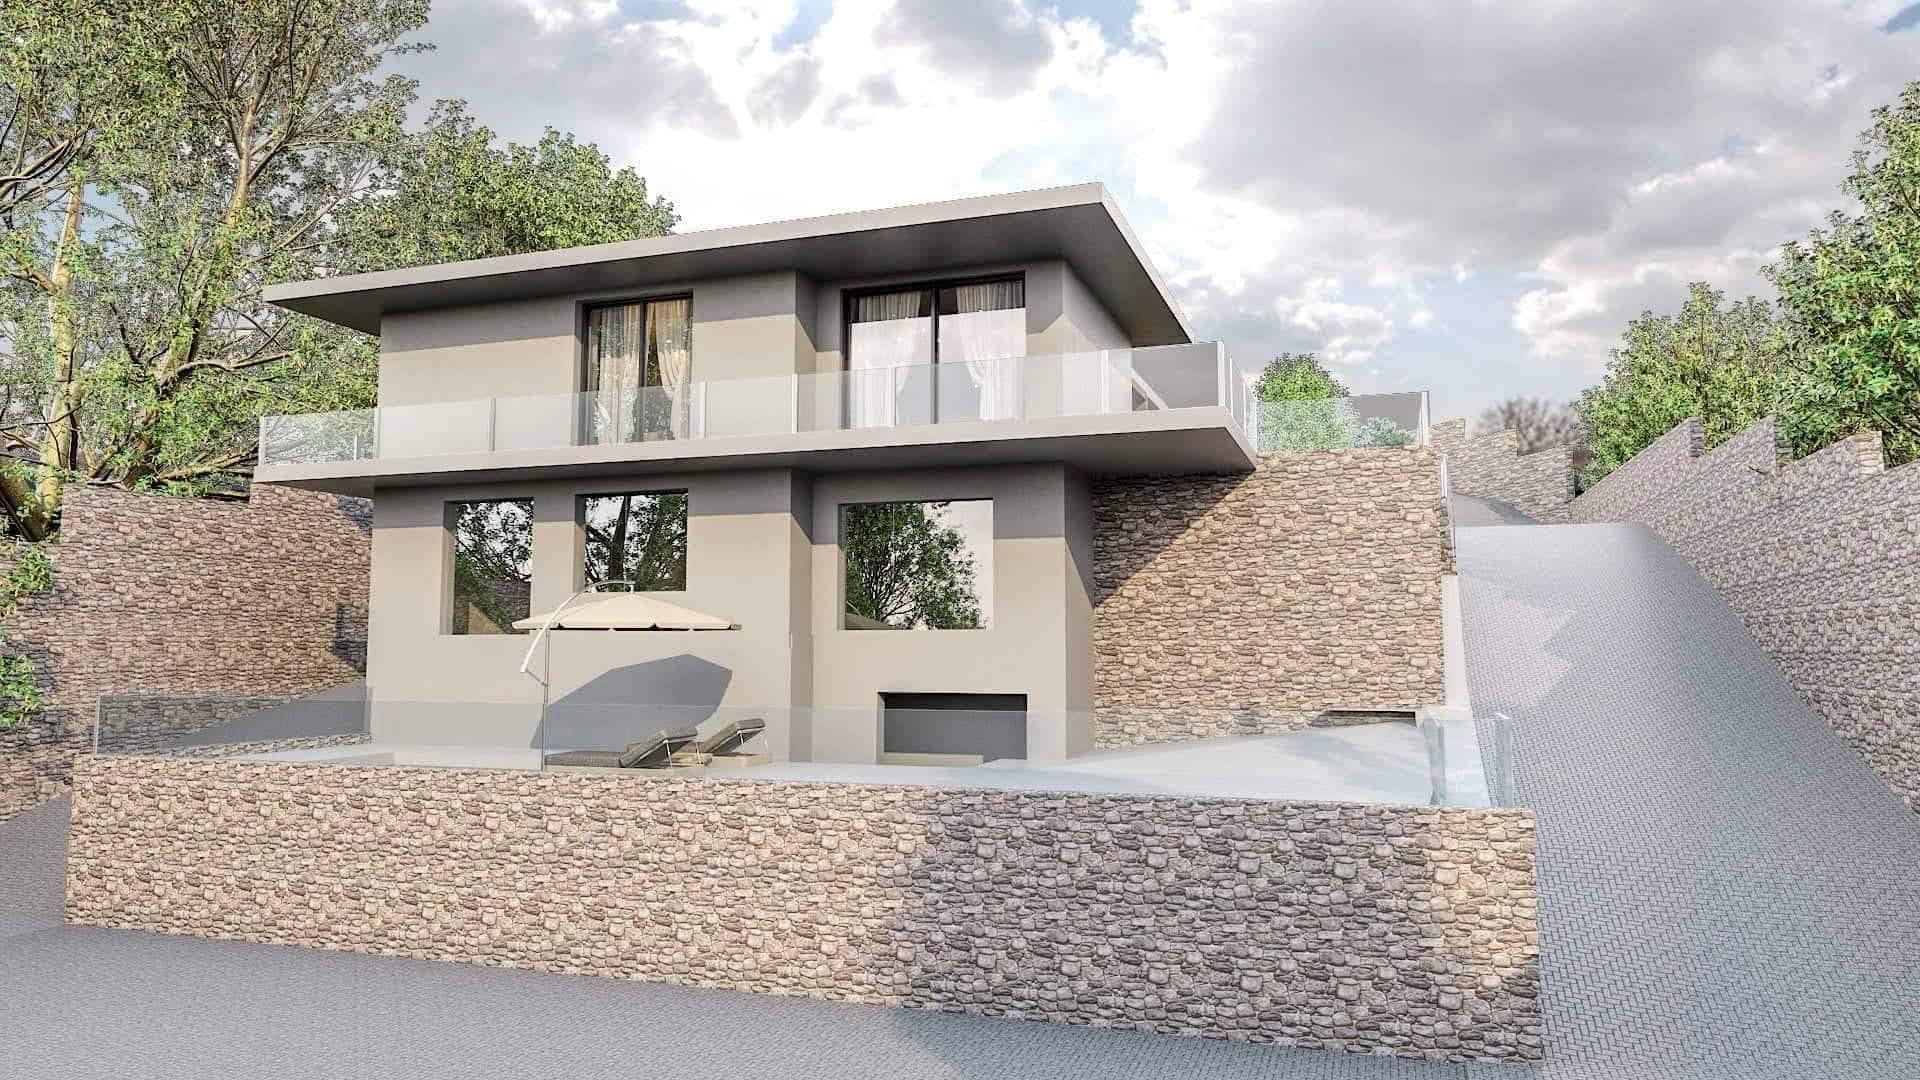 On a plot of 2,700m2 is placed unfinished on three levels Housing 364m2